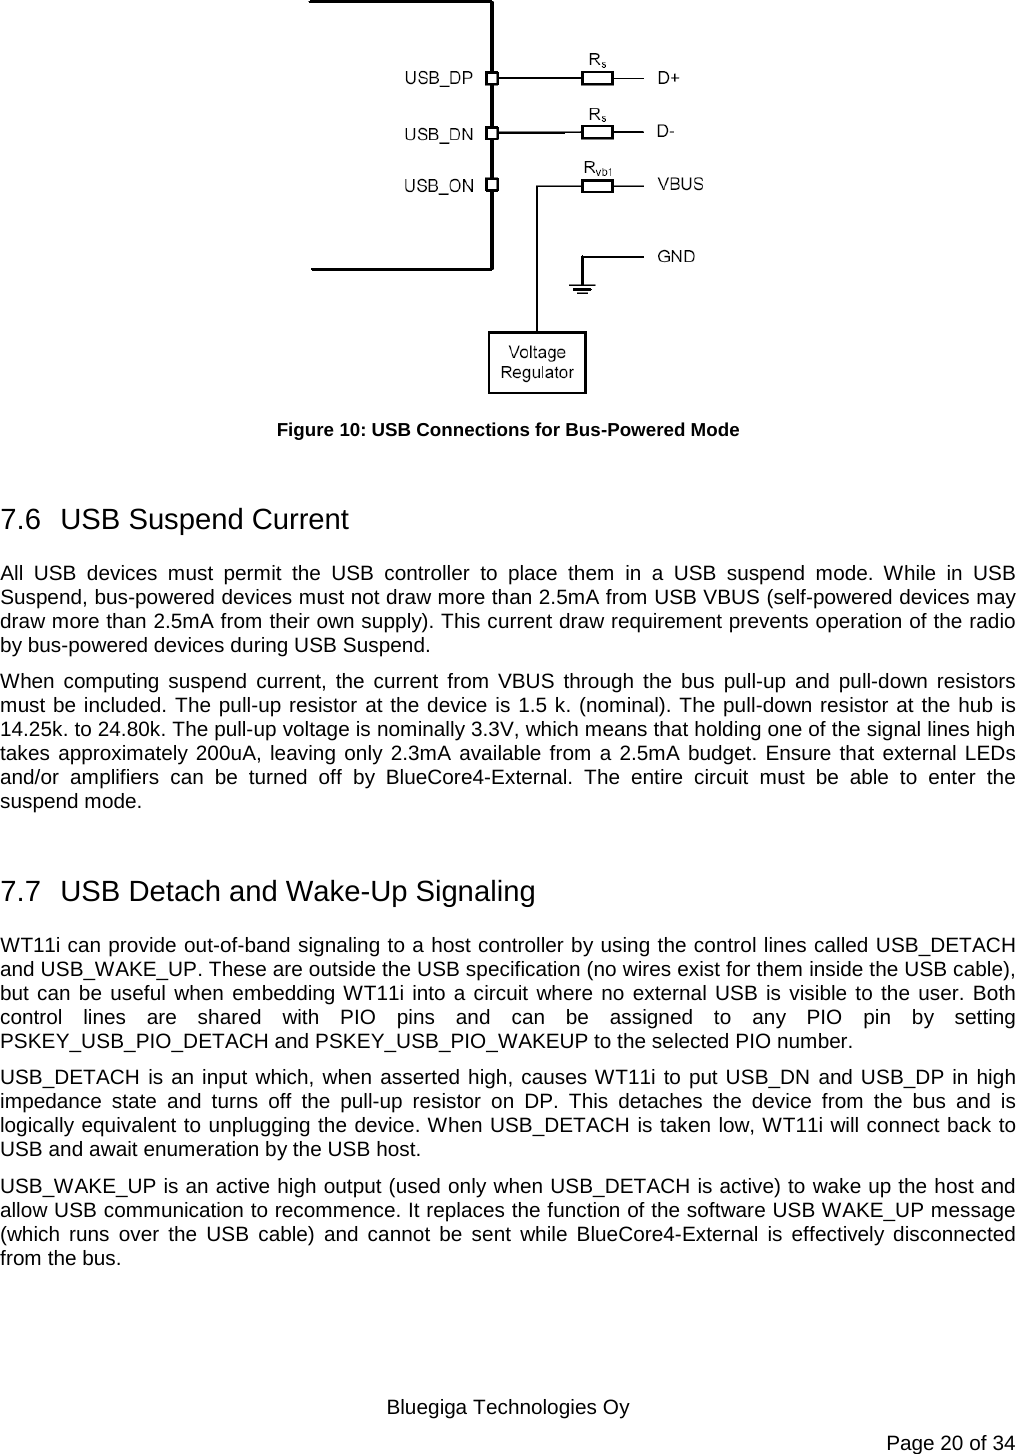   Bluegiga Technologies Oy Page 20 of 34  Figure 10: USB Connections for Bus-Powered Mode  7.6 USB Suspend Current All USB devices must permit the USB controller to place them in a USB suspend mode. While in USB Suspend, bus-powered devices must not draw more than 2.5mA from USB VBUS (self-powered devices may draw more than 2.5mA from their own supply). This current draw requirement prevents operation of the radio by bus-powered devices during USB Suspend. When computing suspend current, the current from VBUS through the bus pull-up and pull-down resistors must be included. The pull-up resistor at the device is 1.5 k. (nominal). The pull-down resistor at the hub is 14.25k. to 24.80k. The pull-up voltage is nominally 3.3V, which means that holding one of the signal lines high takes approximately 200uA, leaving only 2.3mA available from a 2.5mA budget. Ensure that external LEDs and/or amplifiers can be turned off by BlueCore4-External. The entire circuit must be able to enter the suspend mode.  7.7 USB Detach and Wake-Up Signaling WT11i can provide out-of-band signaling to a host controller by using the control lines called USB_DETACH and USB_WAKE_UP. These are outside the USB specification (no wires exist for them inside the USB cable), but can be useful when embedding WT11i into a circuit where no external USB is visible to the user. Both control lines are shared with PIO pins and can be assigned to any PIO pin by setting PSKEY_USB_PIO_DETACH and PSKEY_USB_PIO_WAKEUP to the selected PIO number. USB_DETACH is an input which, when asserted high, causes WT11i to put USB_DN and USB_DP in high impedance state and turns off the pull-up resistor on DP. This detaches the device from the bus and is logically equivalent to unplugging the device. When USB_DETACH is taken low, WT11i will connect back to USB and await enumeration by the USB host. USB_WAKE_UP is an active high output (used only when USB_DETACH is active) to wake up the host and allow USB communication to recommence. It replaces the function of the software USB WAKE_UP message (which runs over the USB cable) and cannot be sent while BlueCore4-External is effectively disconnected from the bus. 